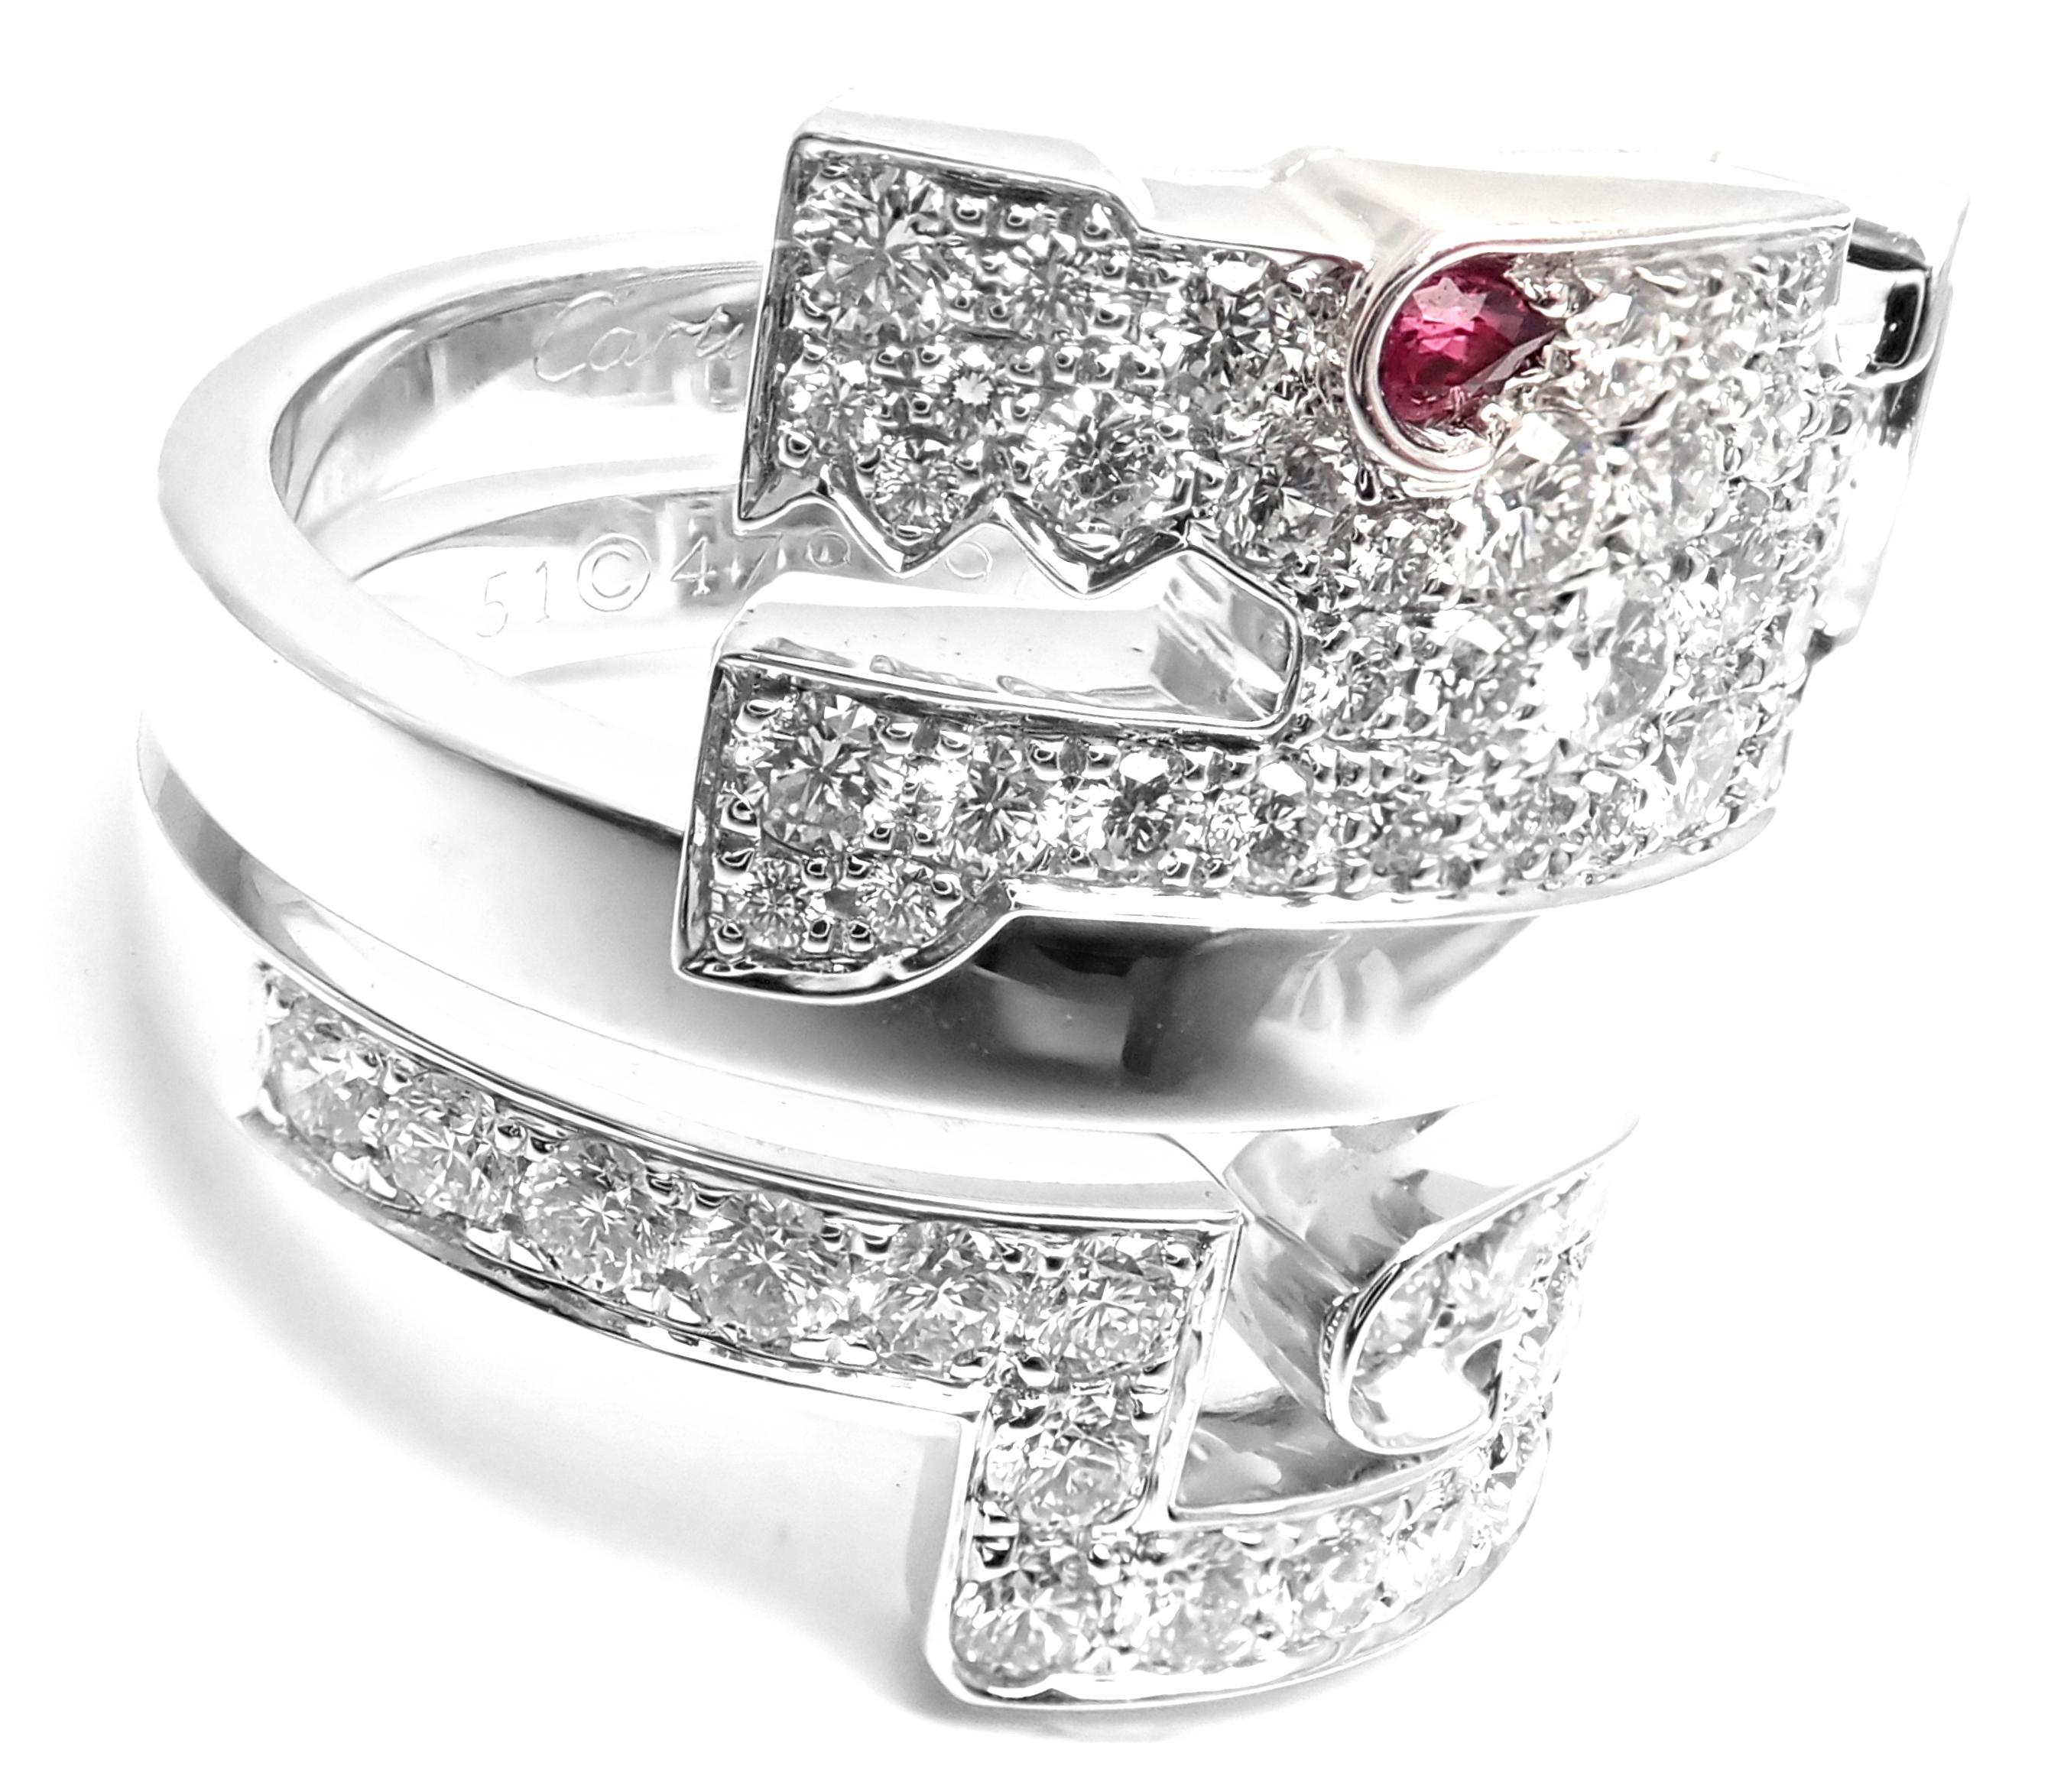 18k White Gold Le Baiser Du Dragon Diamond Ruby Ring by Cartier. 
With 56 round brilliant cut diamonds VVS1 clarity, E color total weight 
approx. 1.68ct
Details: 
Ring Size: European 51, US 5 3/4
Width: 19mm
Weight: 13.9 grams
Stamped Hallmarks: